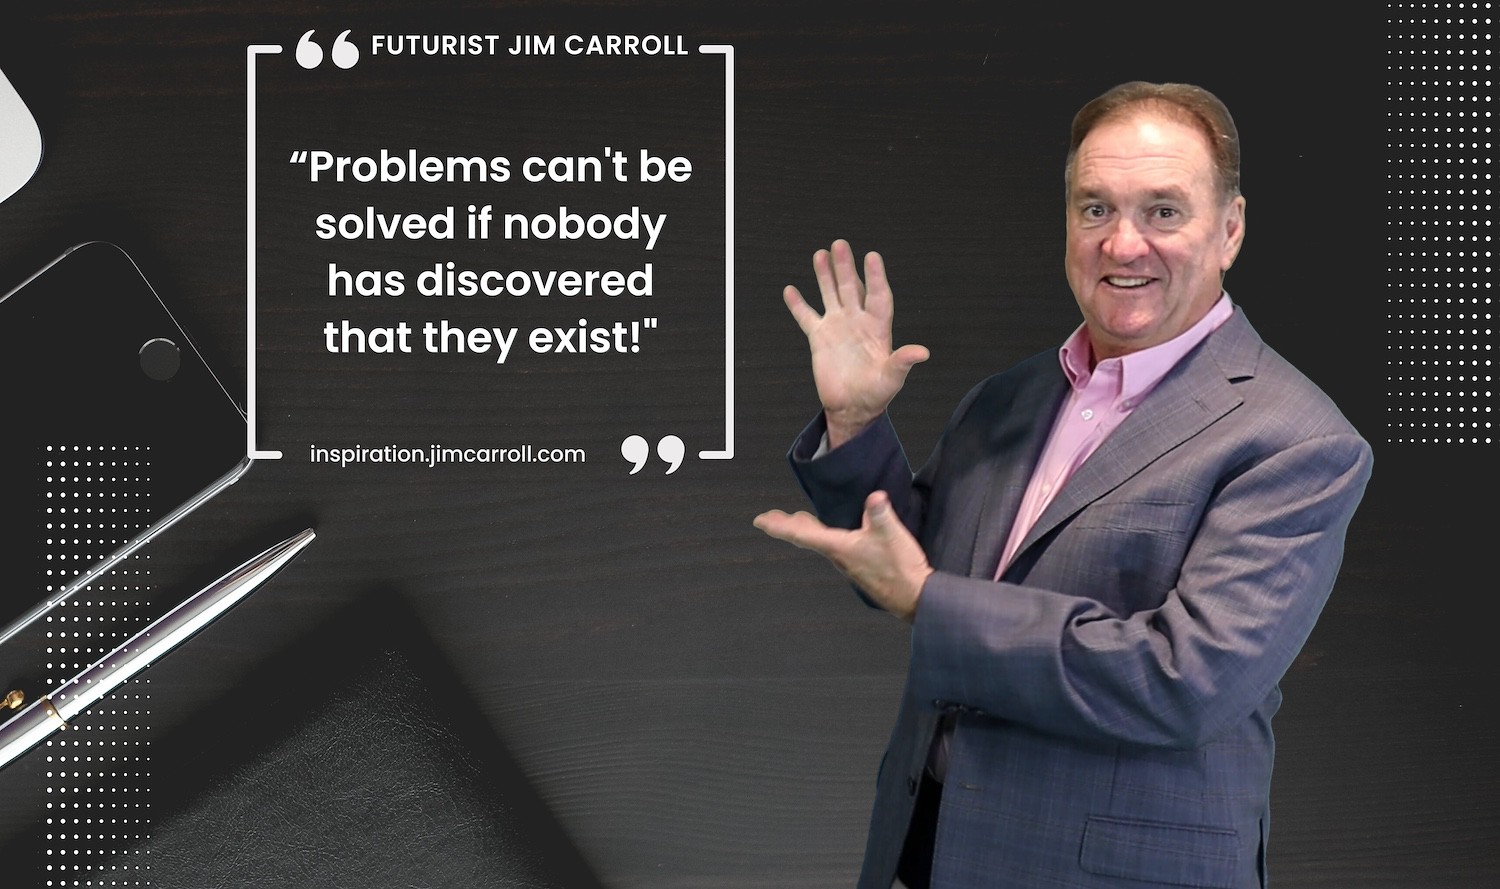 "Problems can't be solved if nobody has discovered that they exist!" - Futurist Jim Carroll